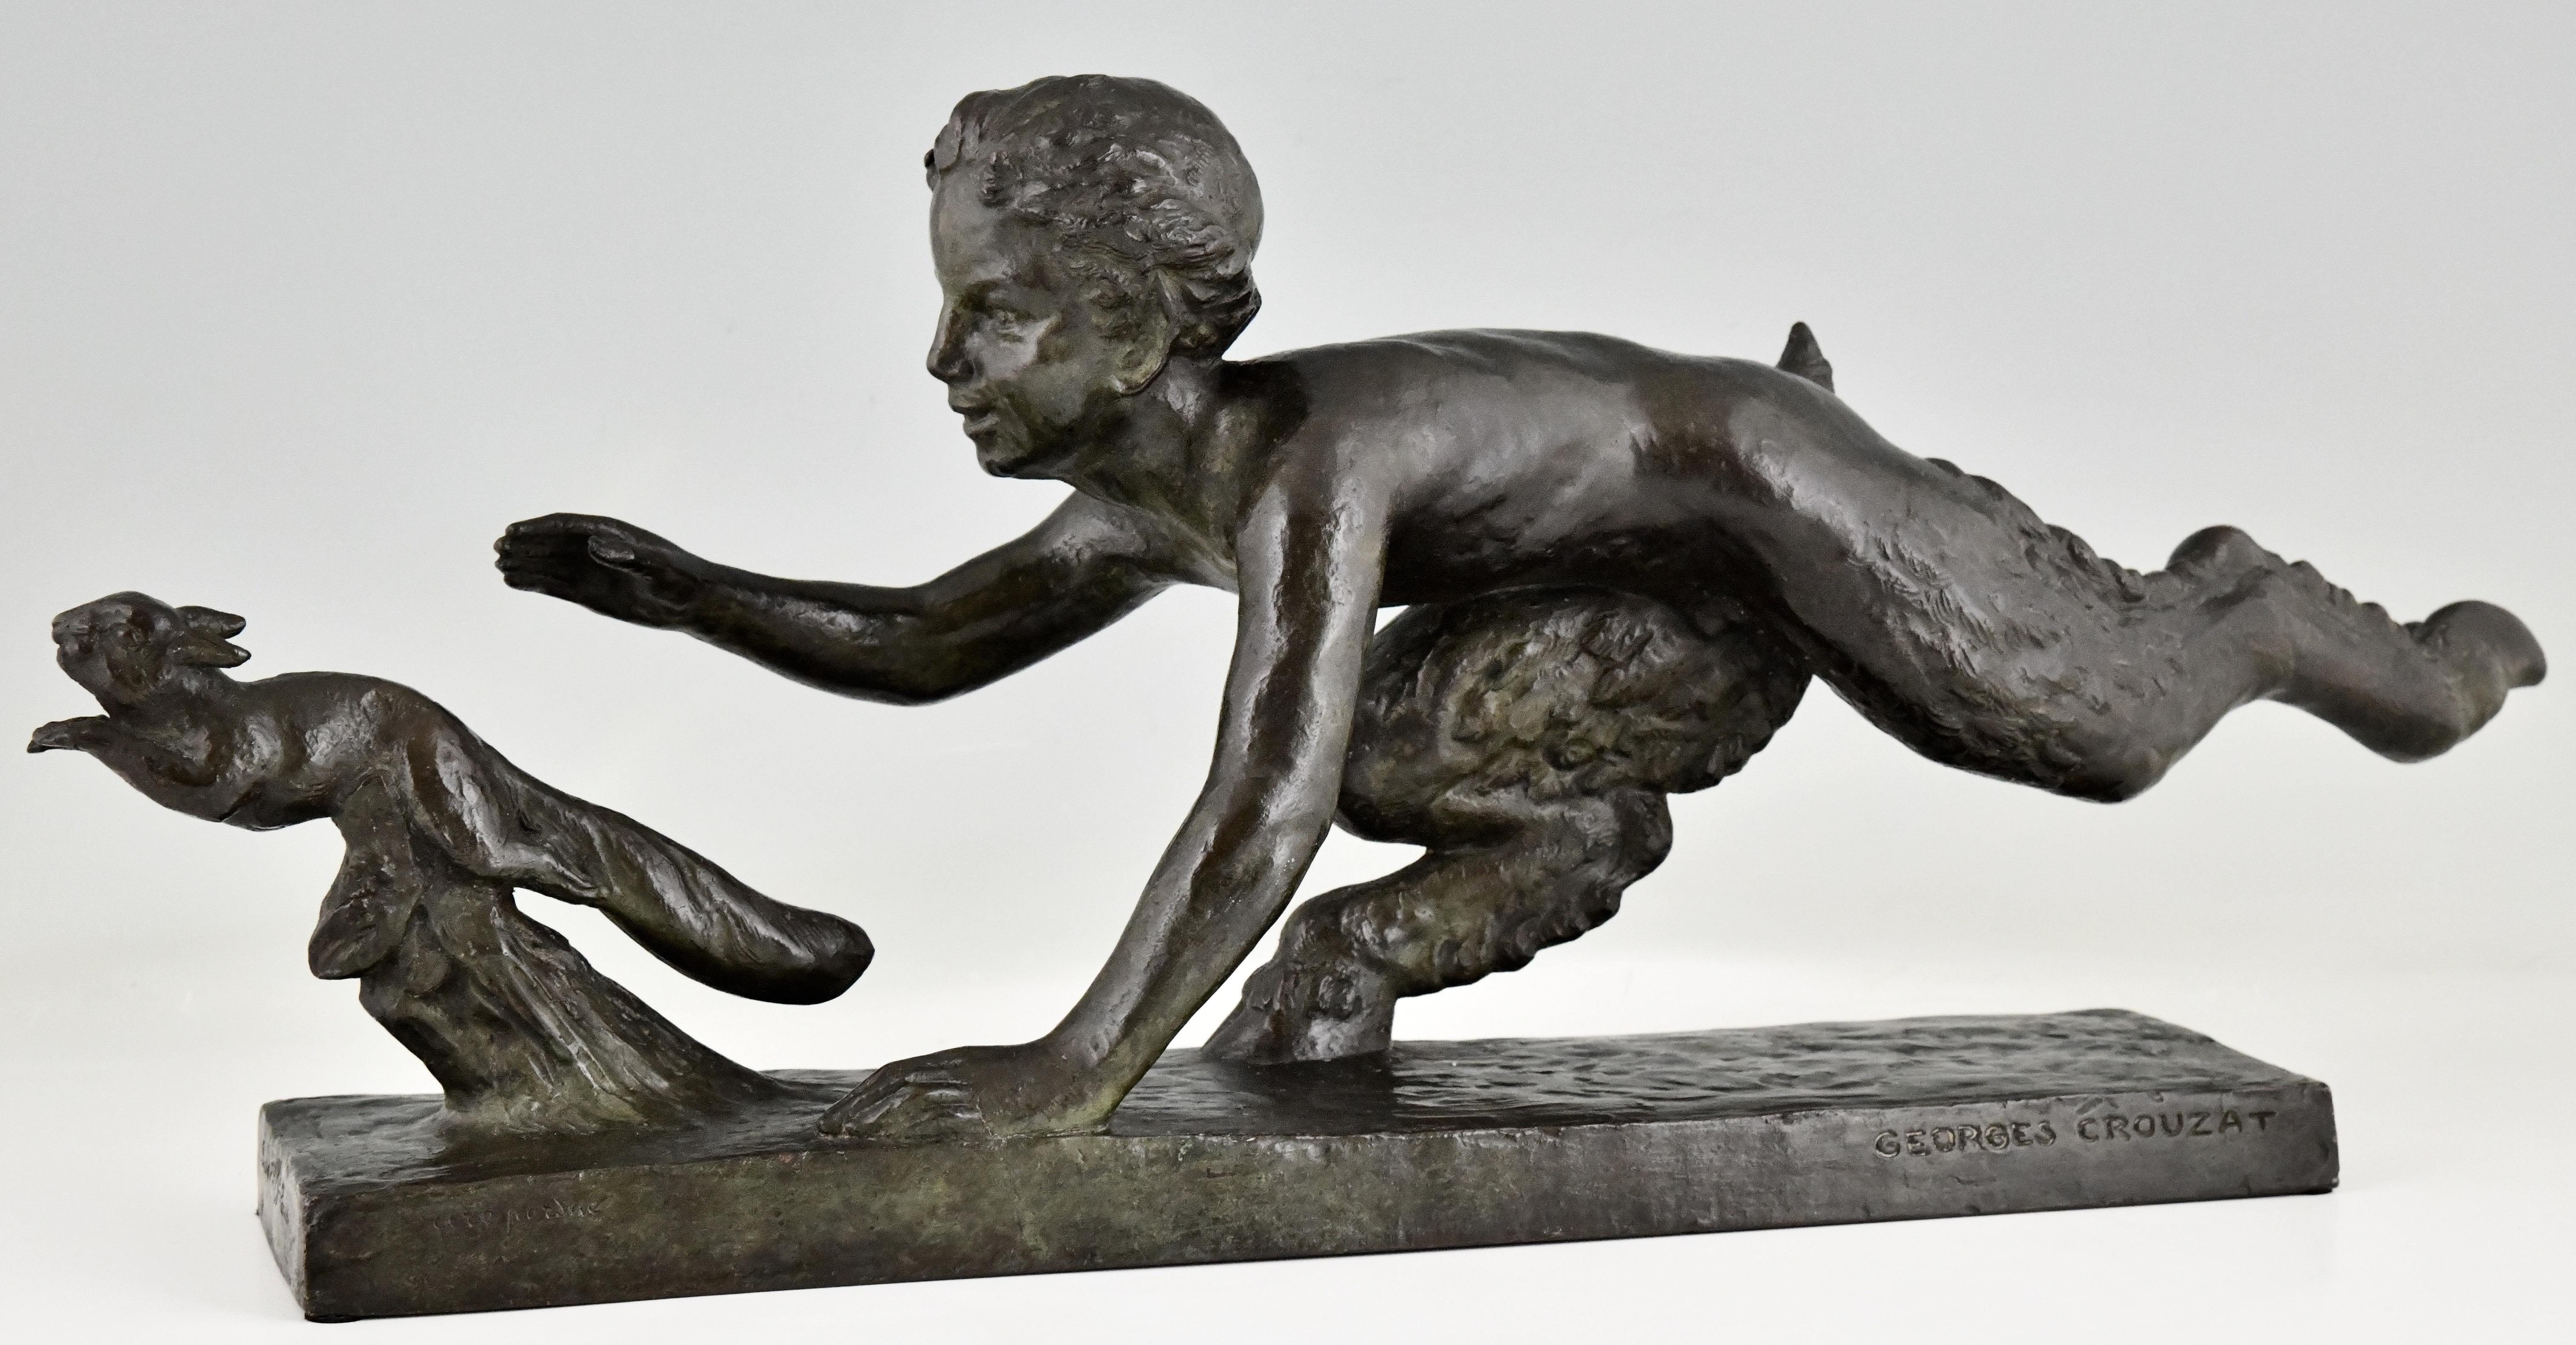 Art Deco bronze sculpture faun and squirrel, Faune à l’ecureuil by Georges Crouzat. 
With the foundry mark of Susse Frères and marked Cire perdue, lost wax technique. 
Bronze with beautiful green patina. France 1934. 
The same sculpture is in the